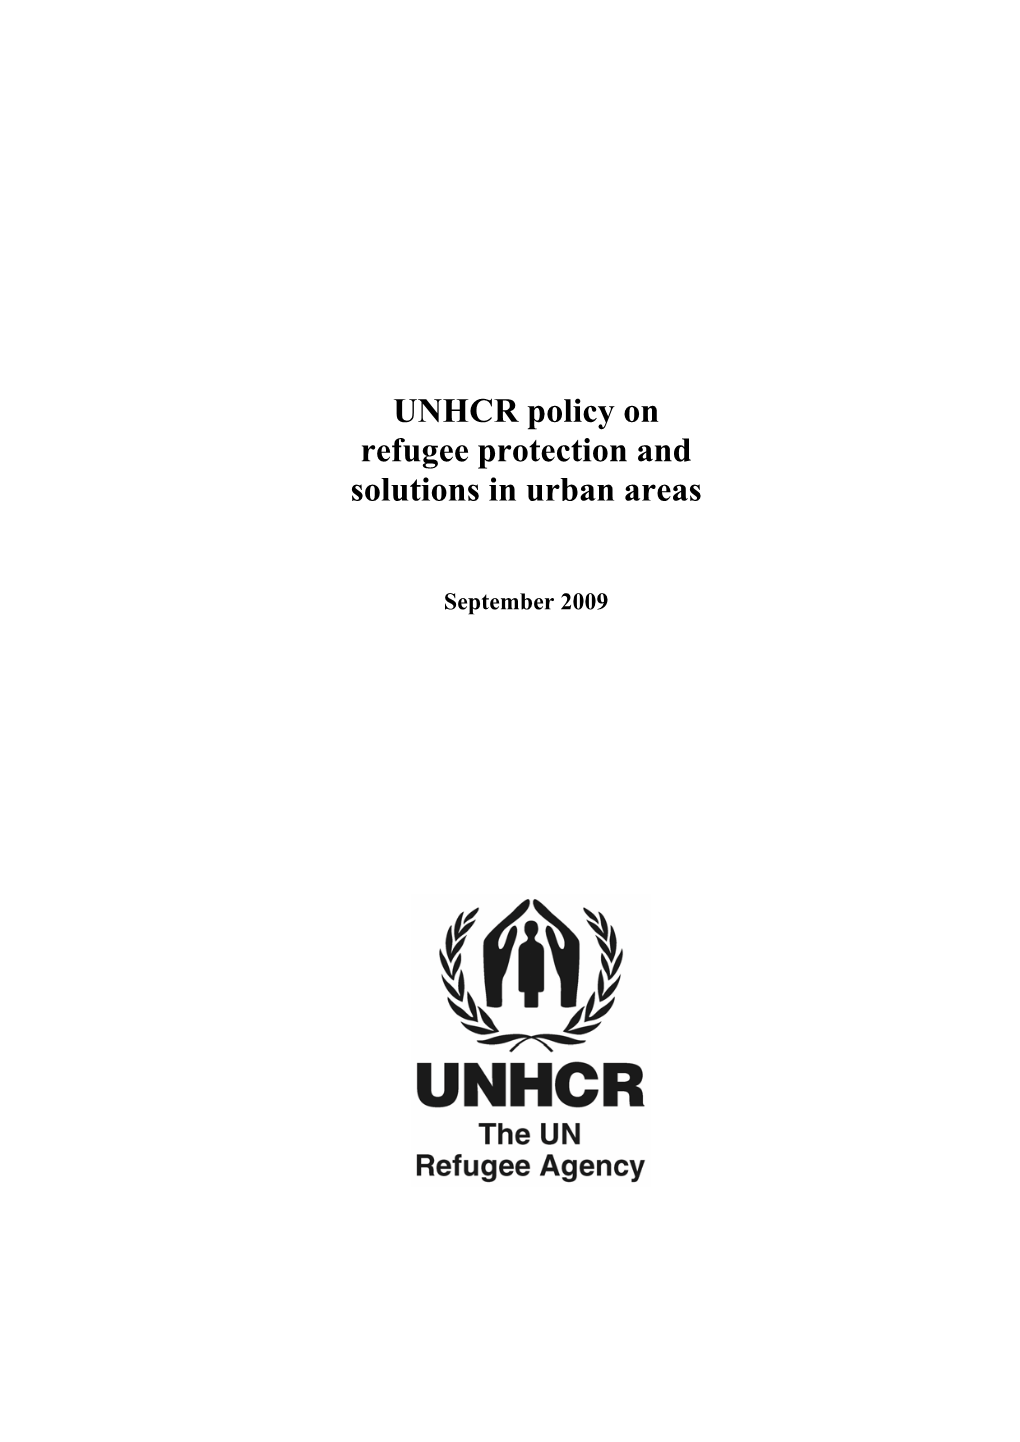 UNHCR Policy on Refugee Protection and Solutions in Urban Areas